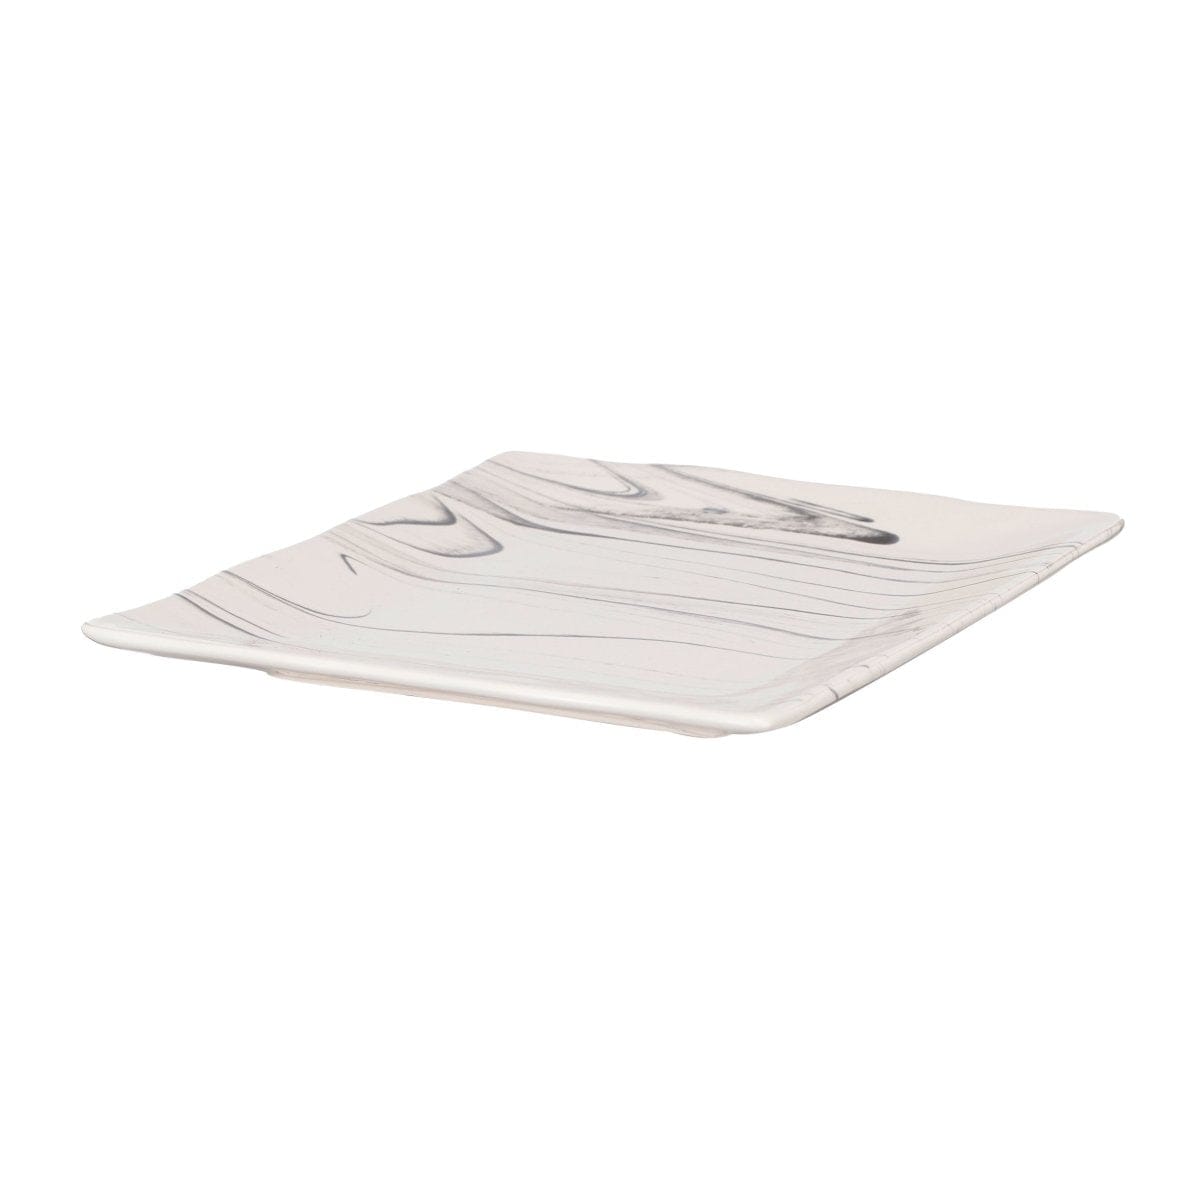 Accessories - AB-0264-Gray-Artist Fare Salad Plate picket and rail